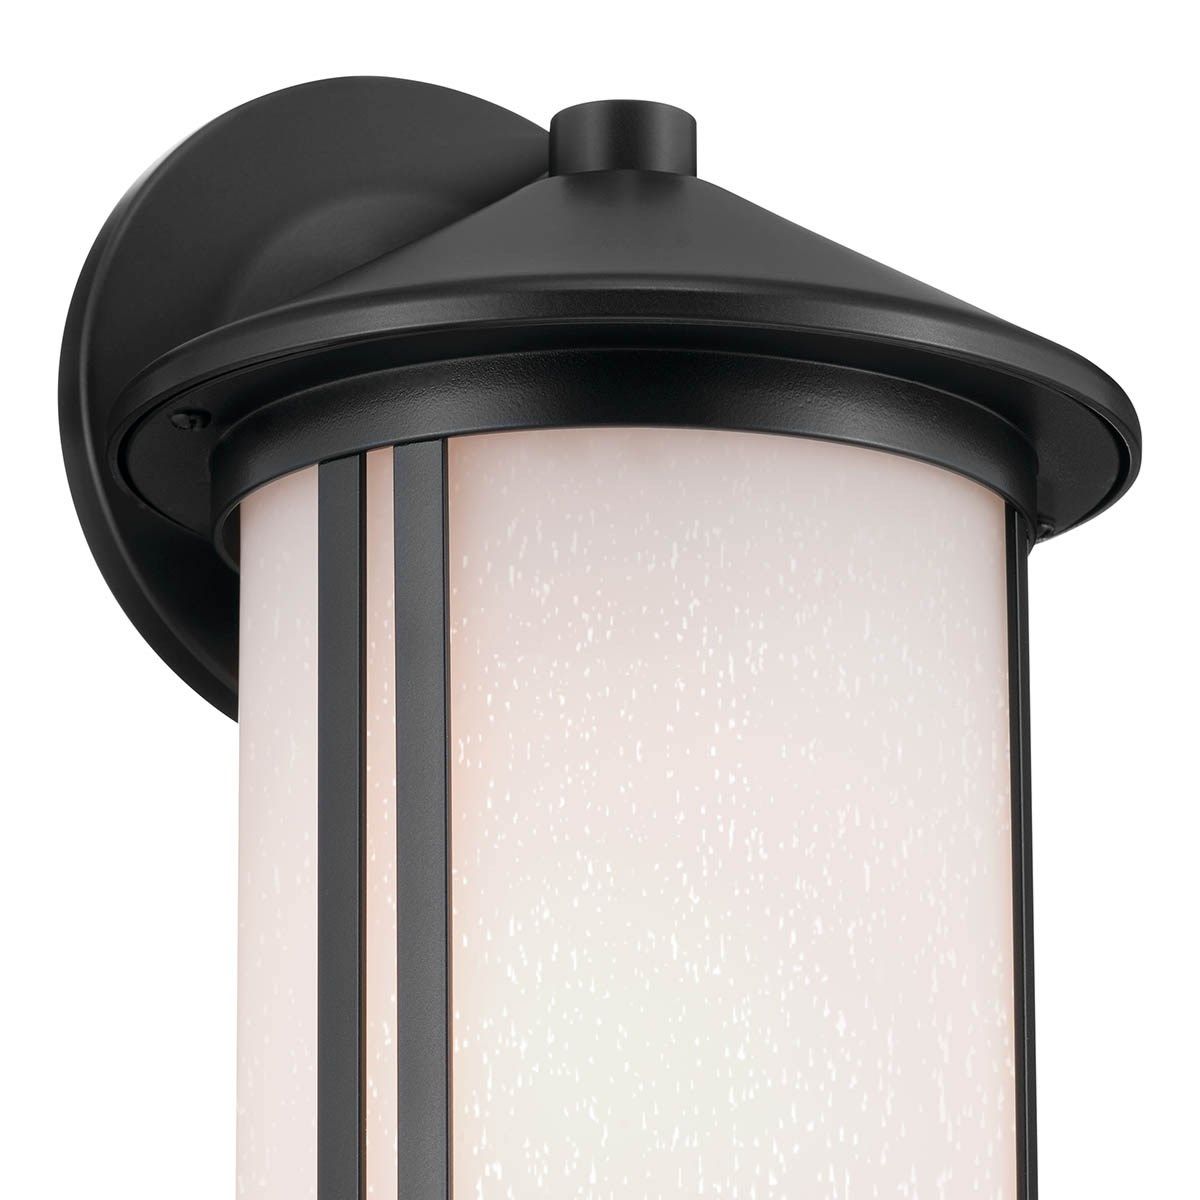 Lombard 13 in. Outdoor Wall Sconce